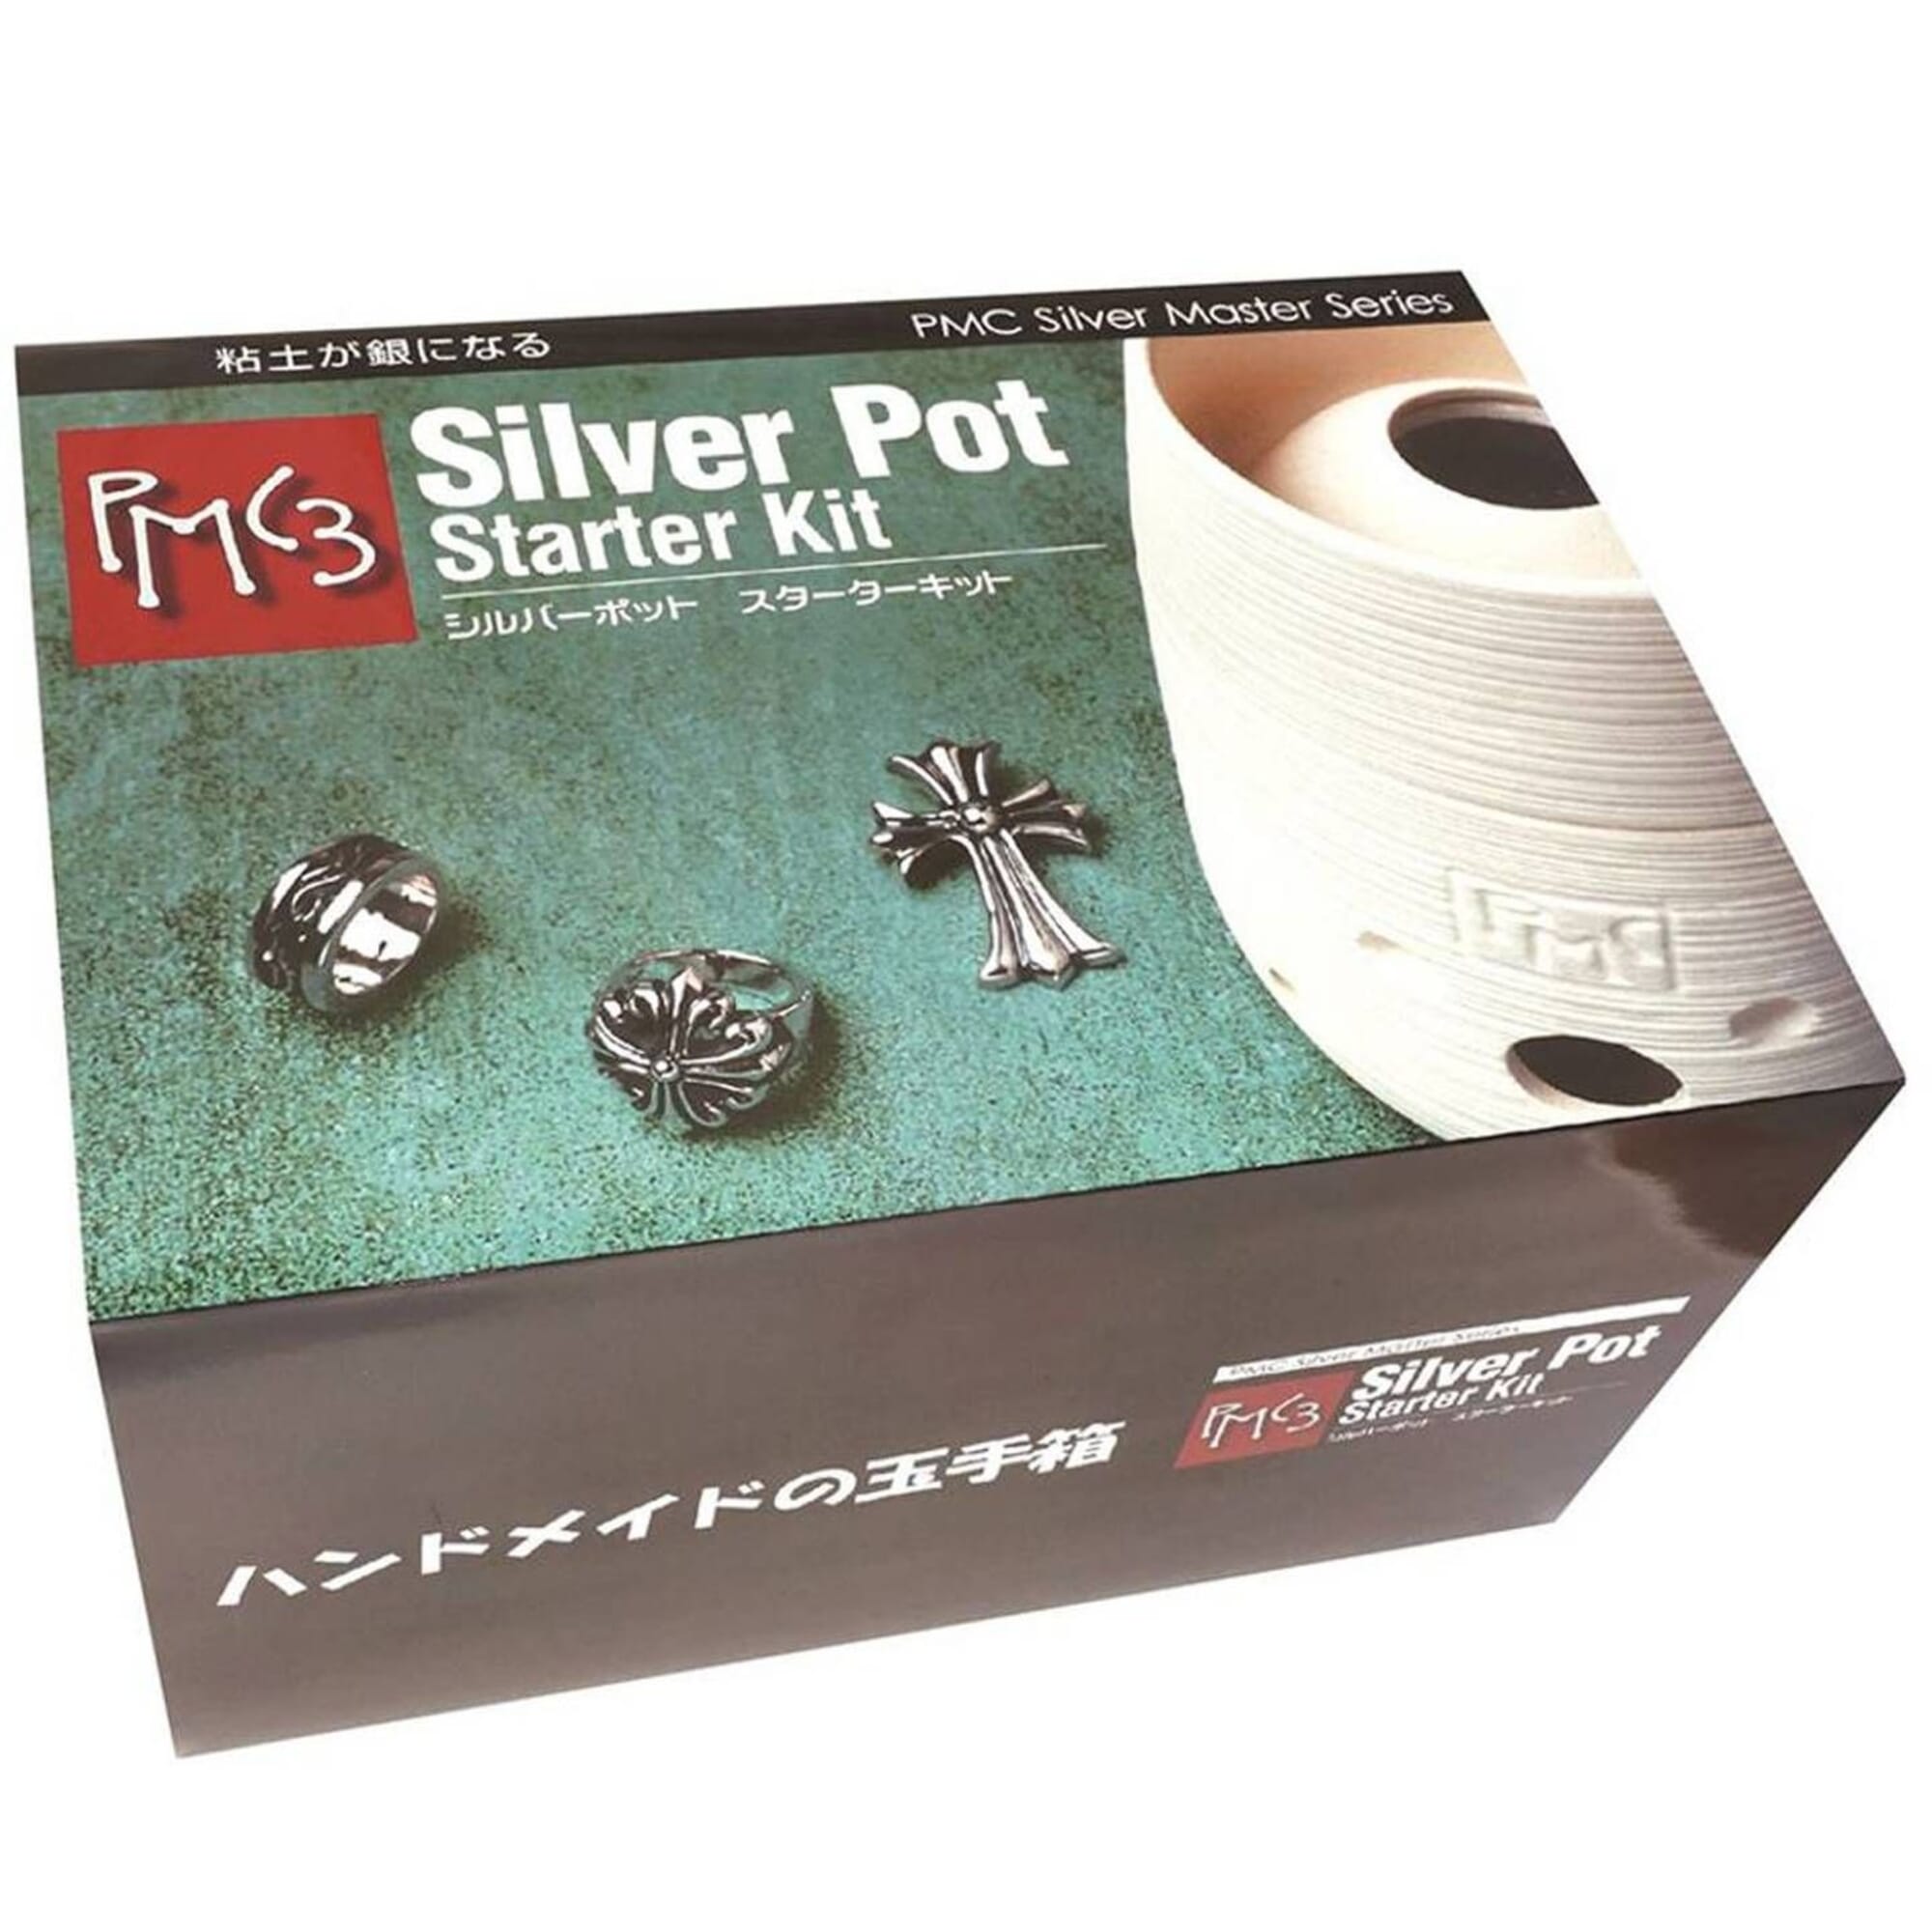 Art Clay Silver Paper Type (10g). Metal Clay Discount Supply